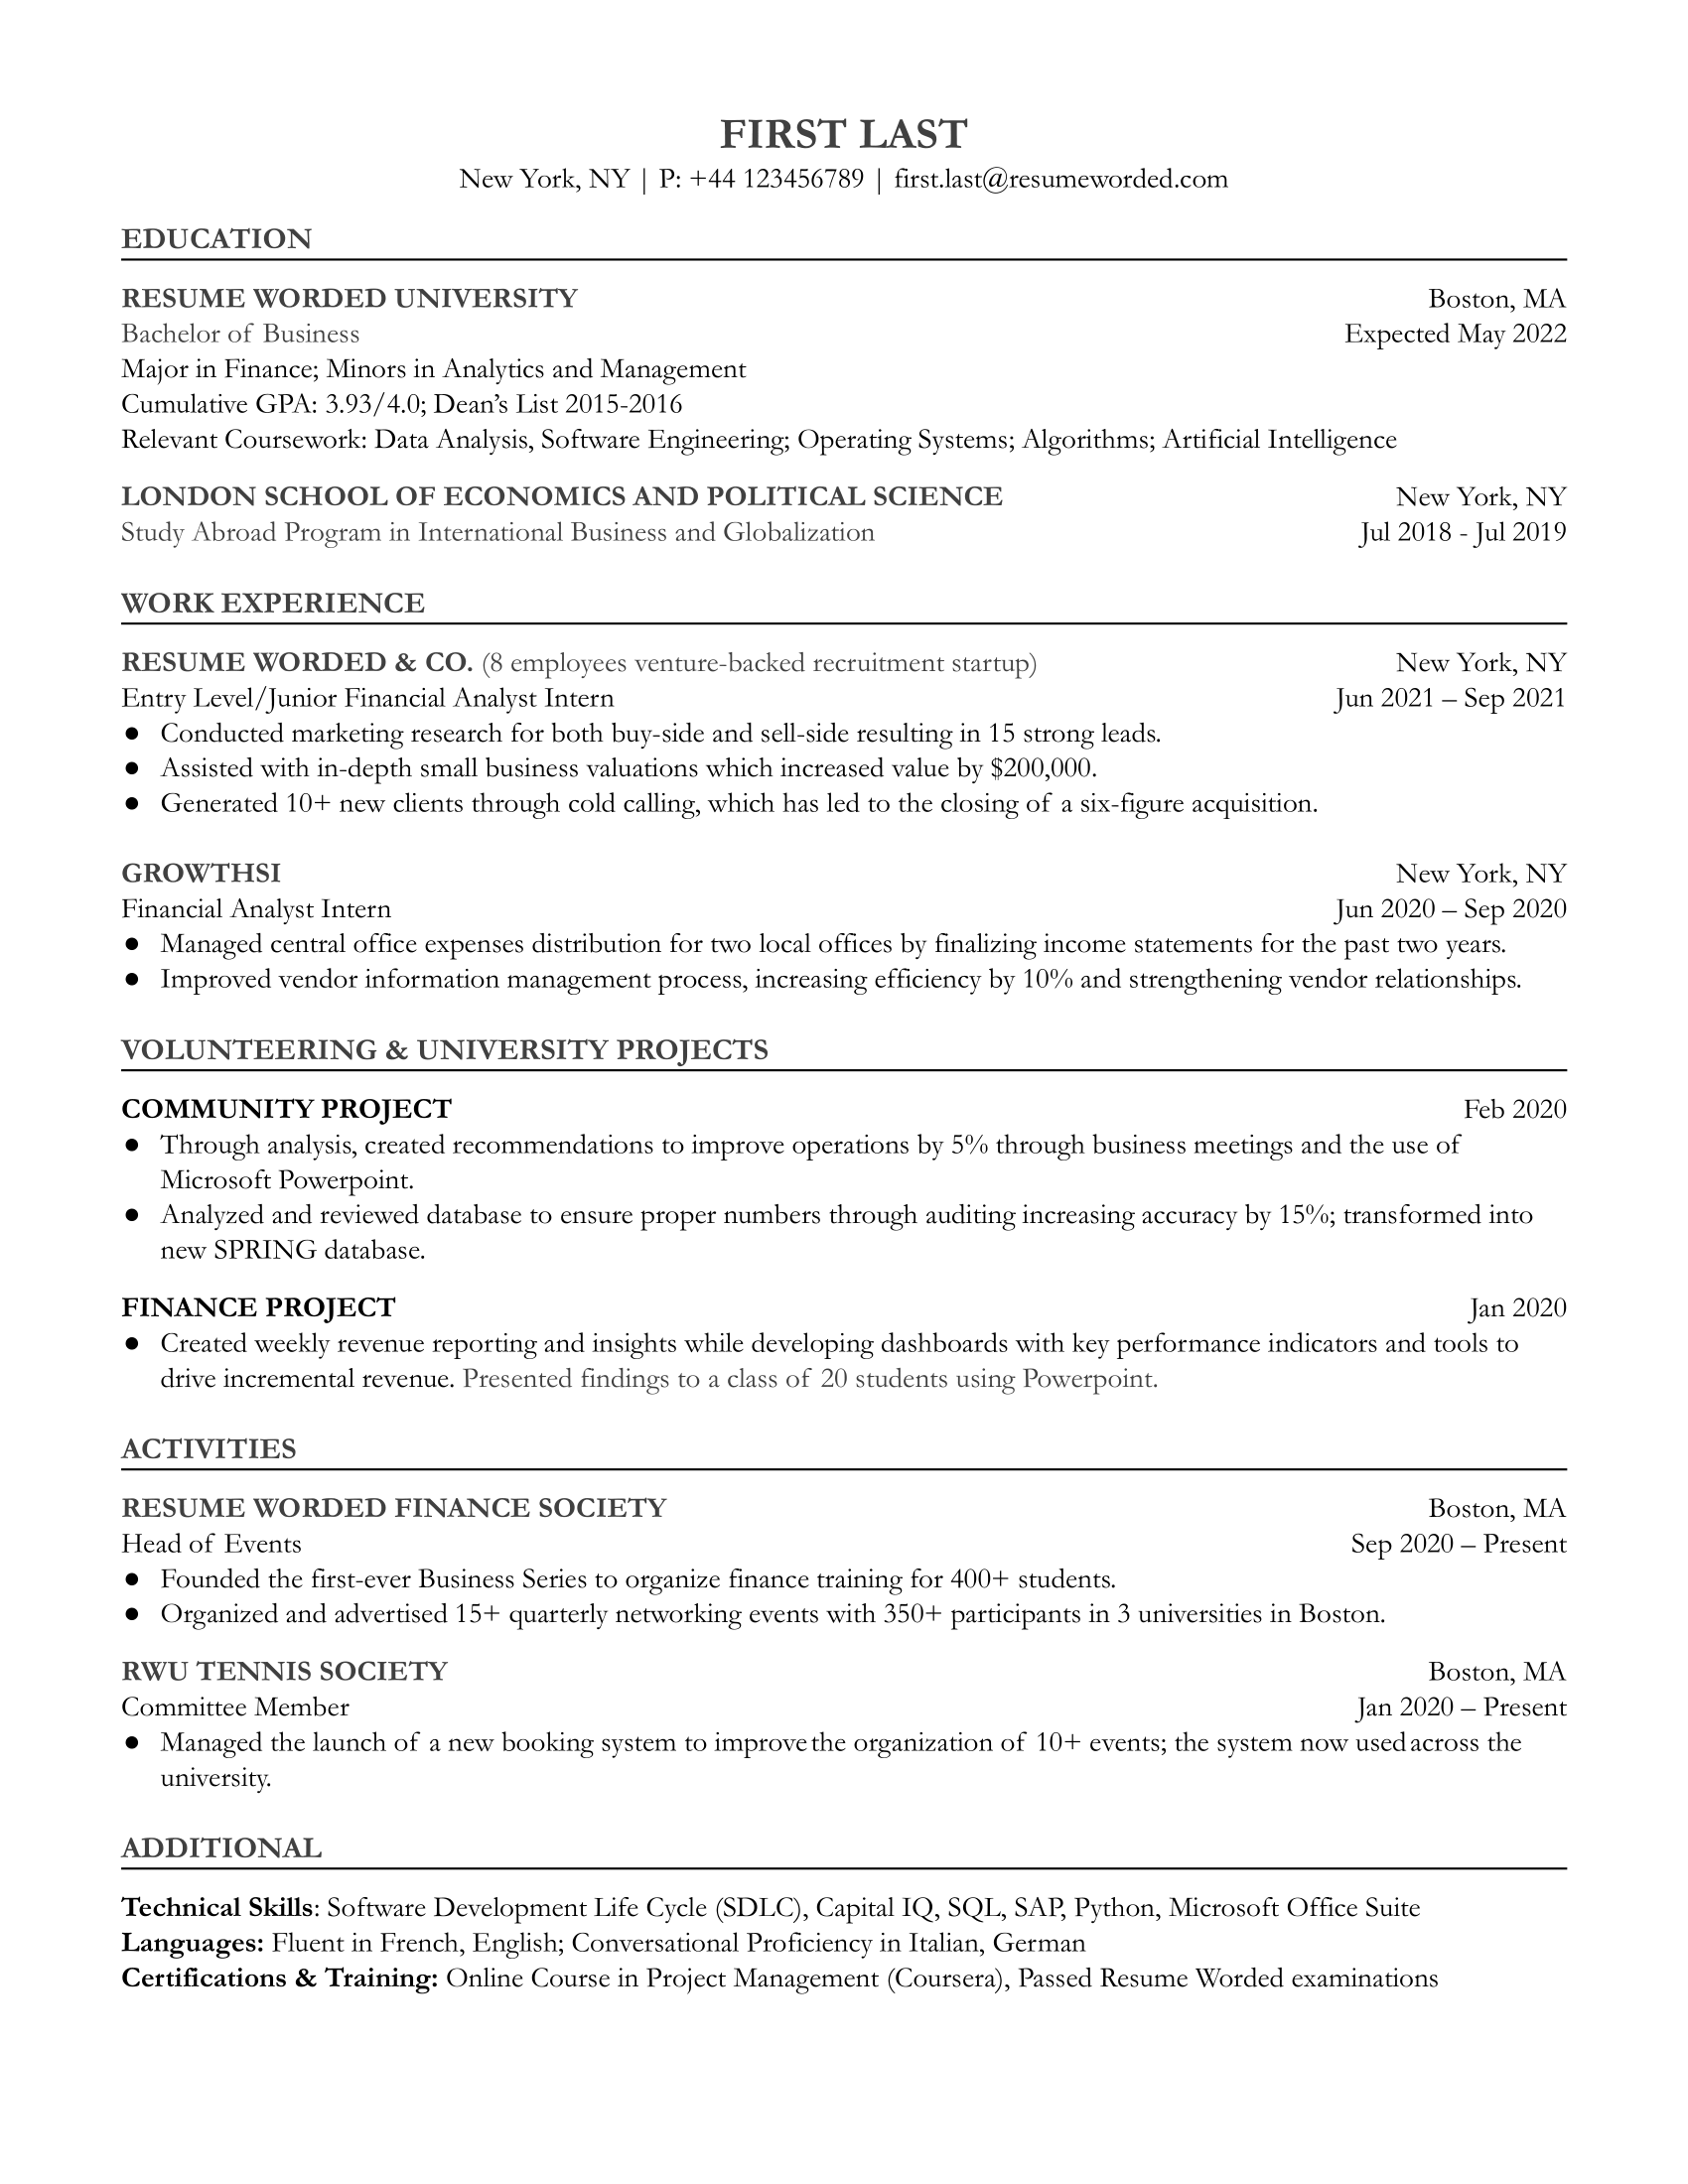 A CV for entry-level financial analyst highlighting quantitative achievements and proficiency in analytical tools.